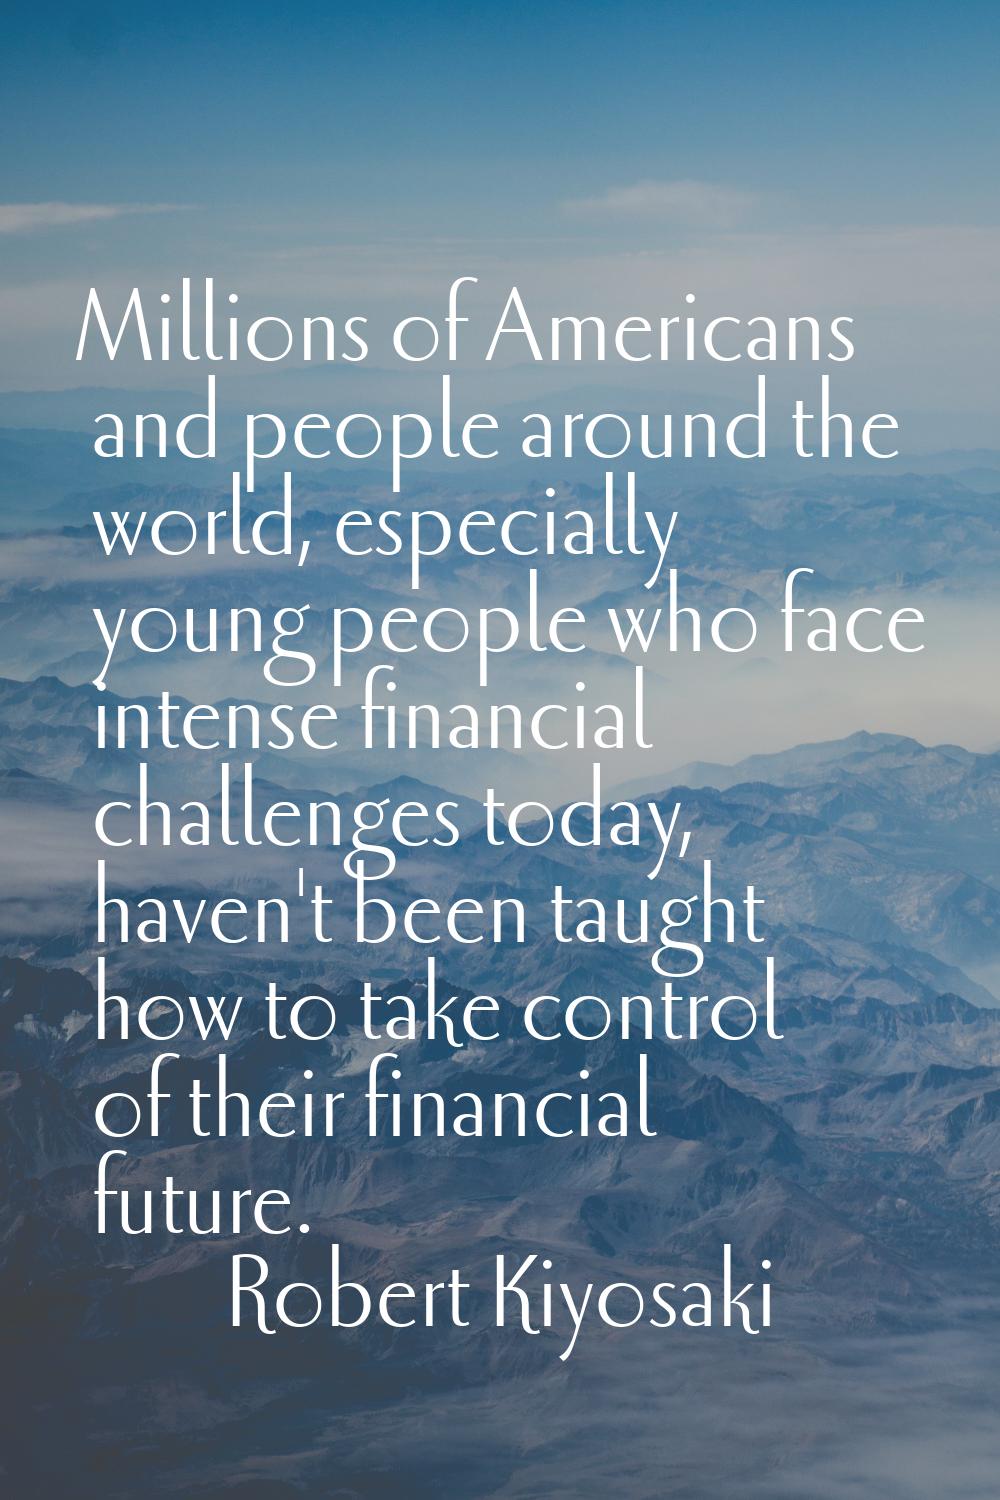 Millions of Americans and people around the world, especially young people who face intense financi